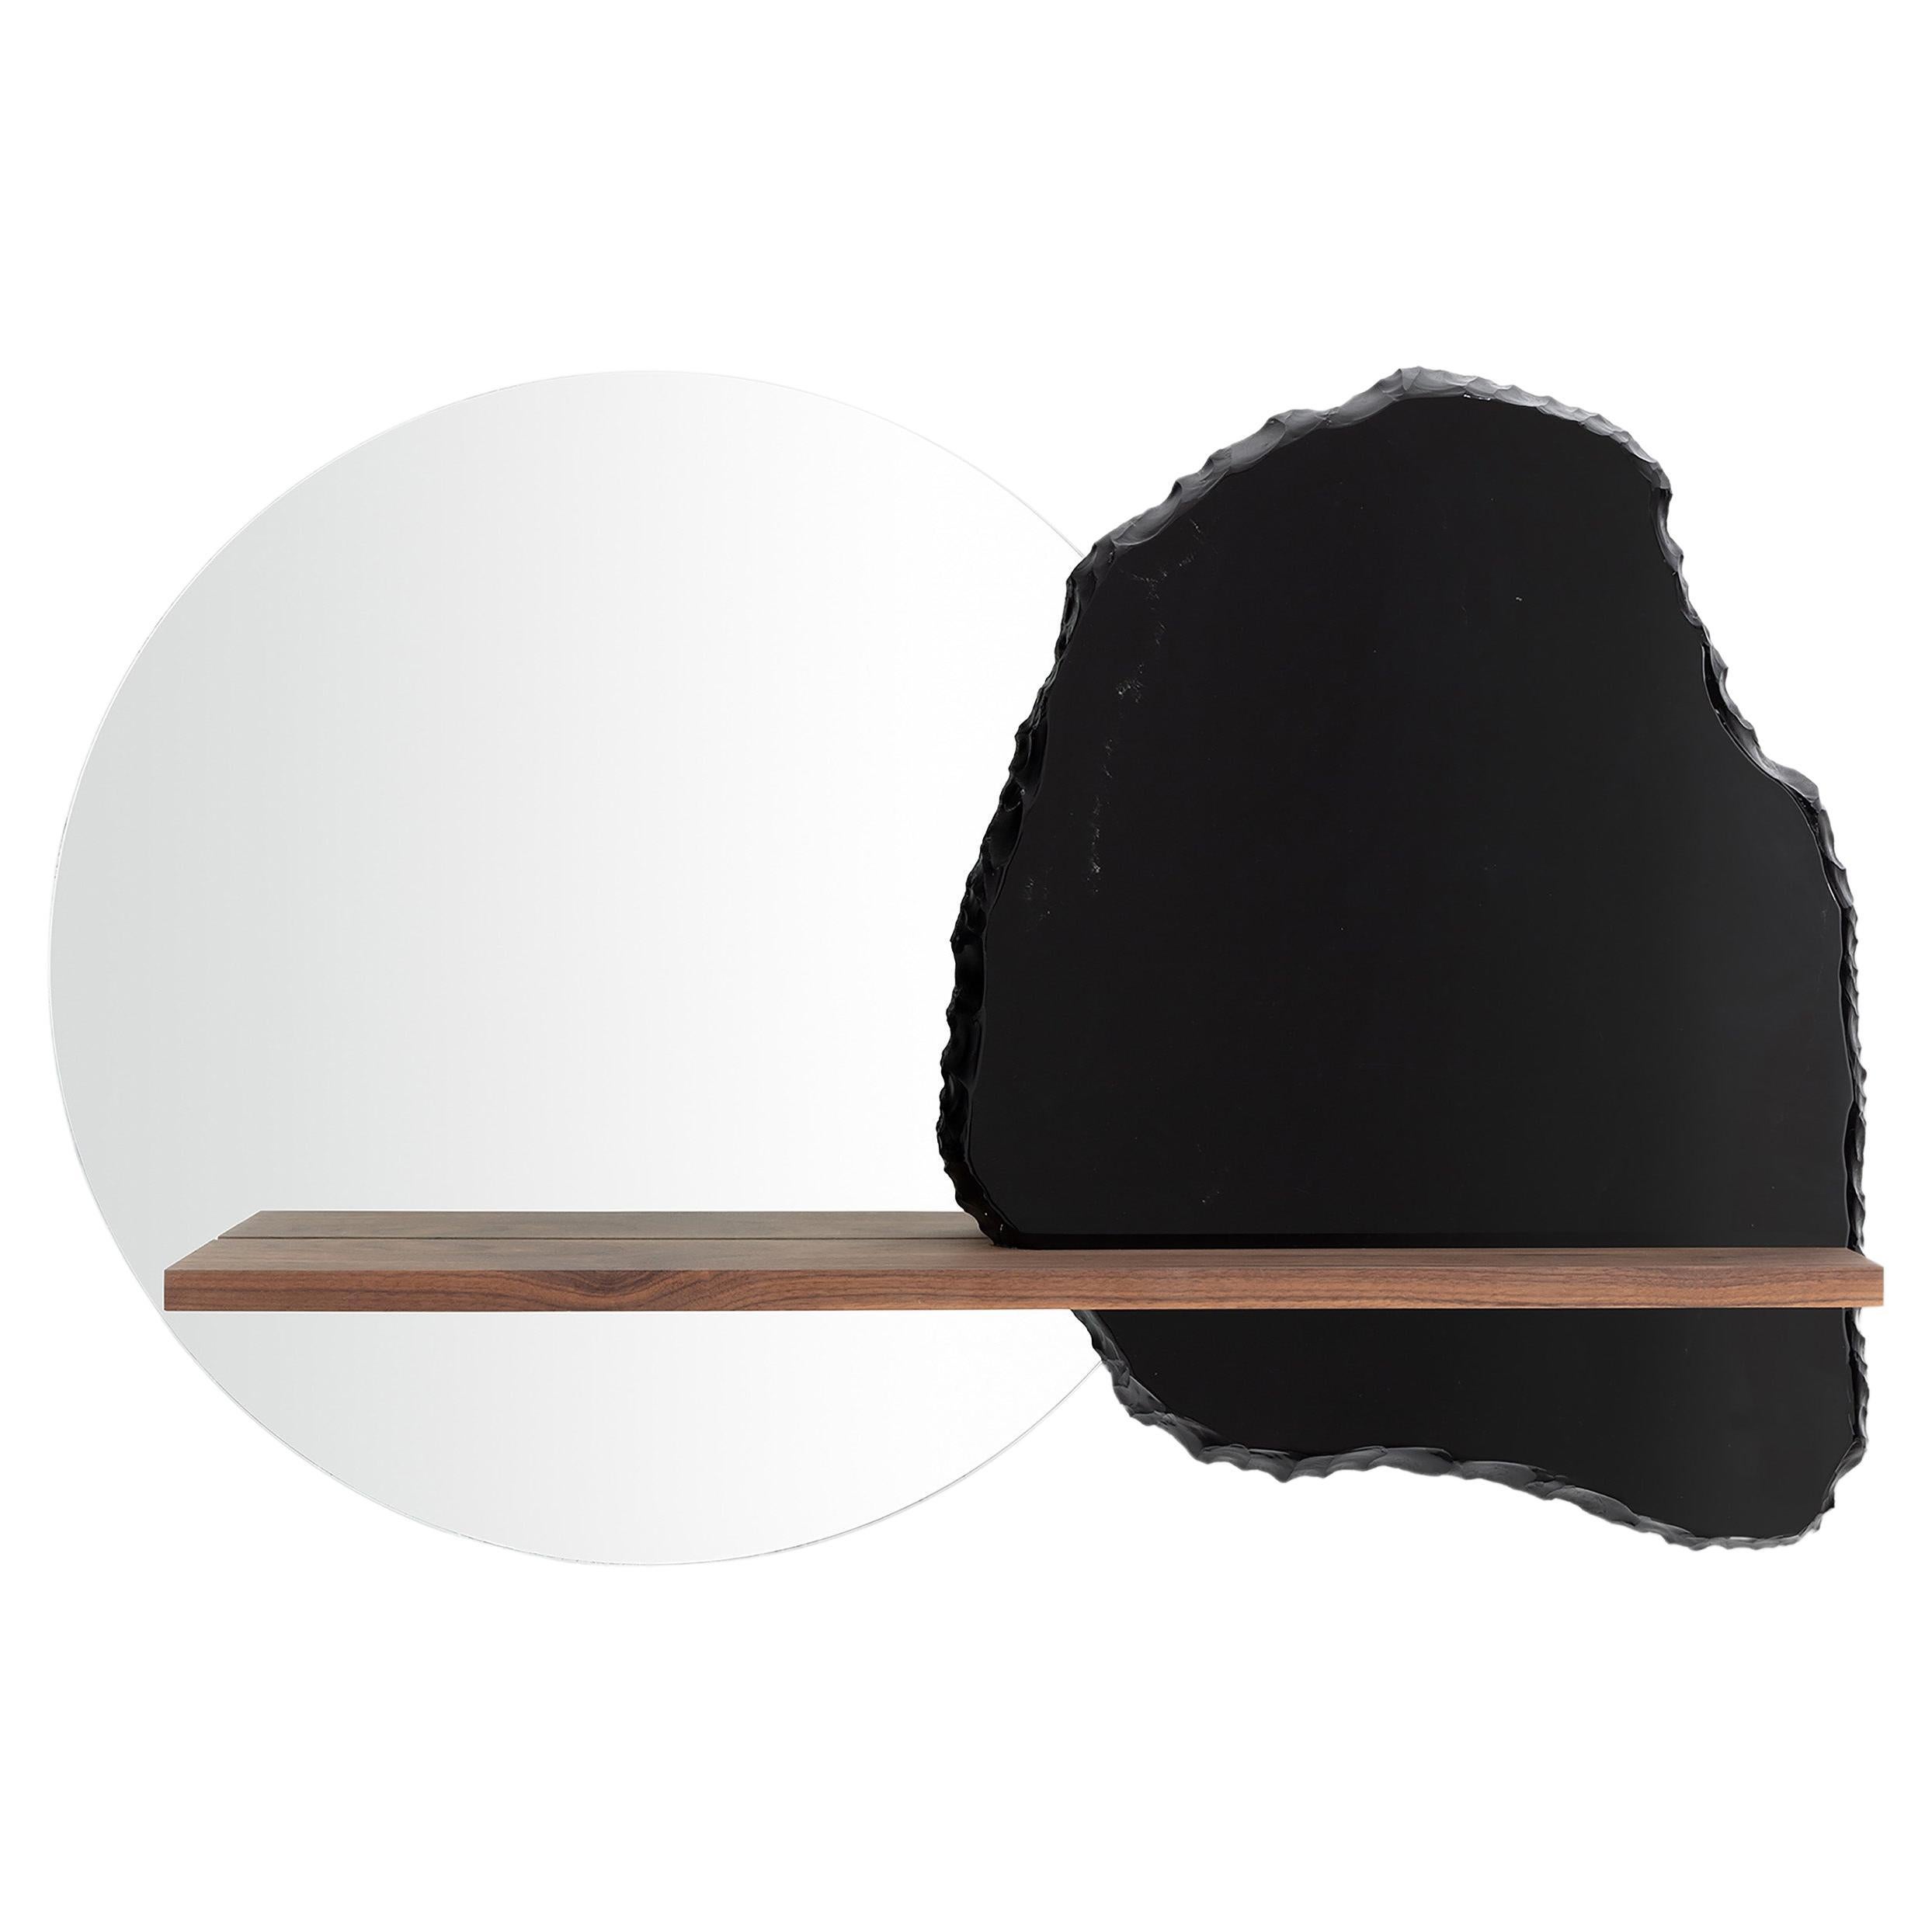 Partial Eclipse by Sten Studio

51.2” W x 6.6” D x 29.5” H
Obsidian, mirror and wood

The central metaphor of this piece is achieved thanks to a material contrast in which the „coldness“ of the obsidian and the mirror creates a dialogue with the